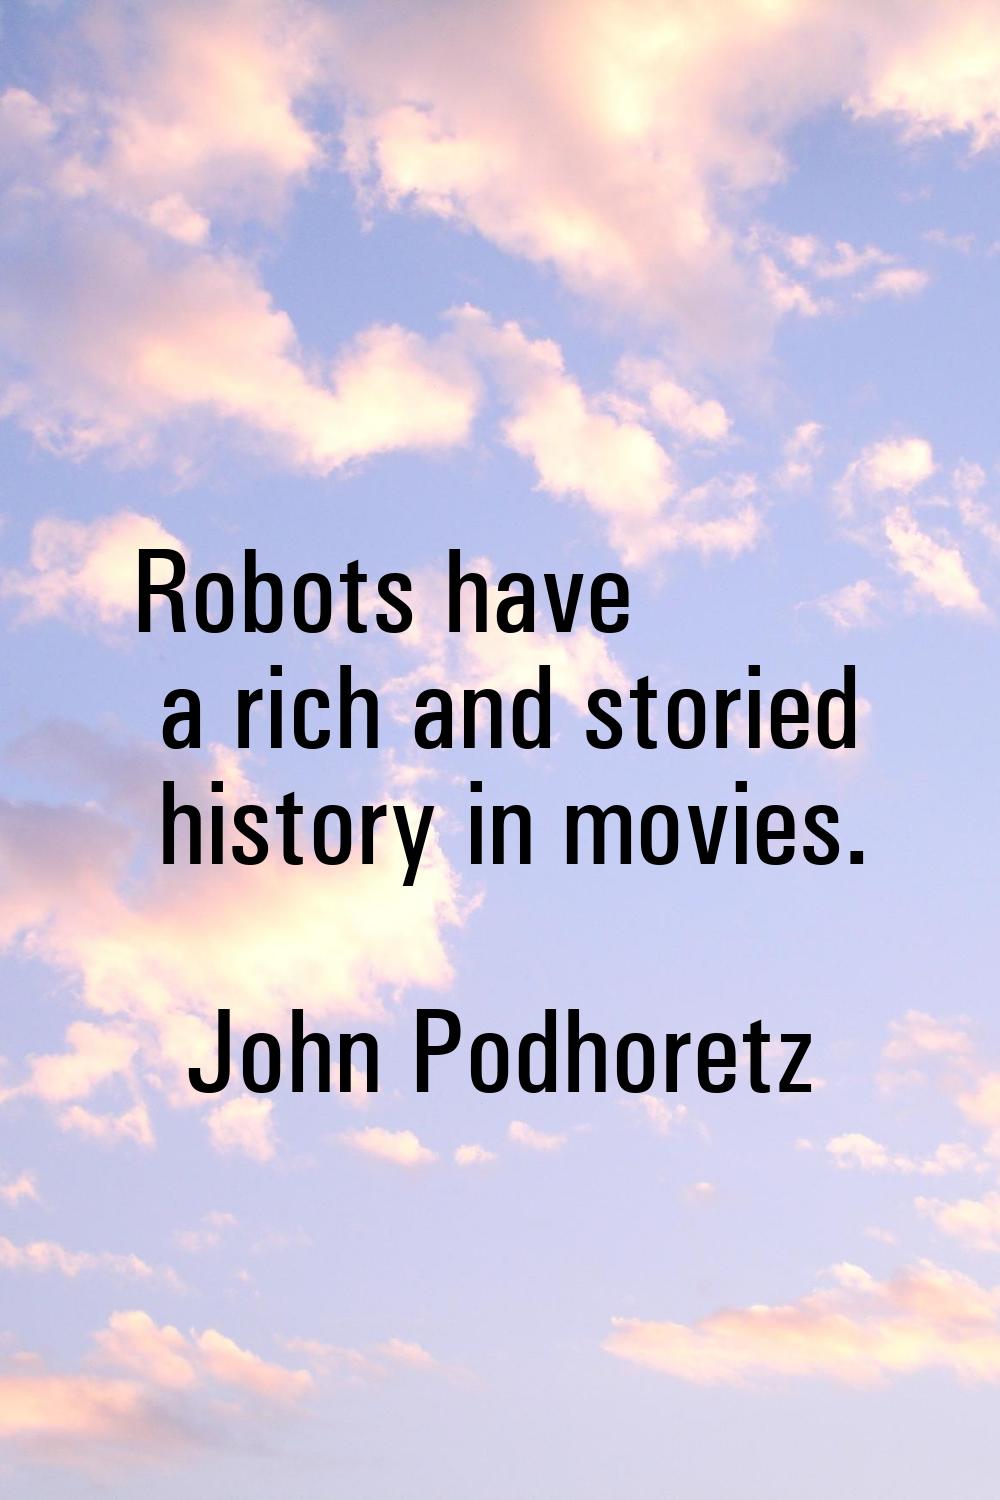 Robots have a rich and storied history in movies.